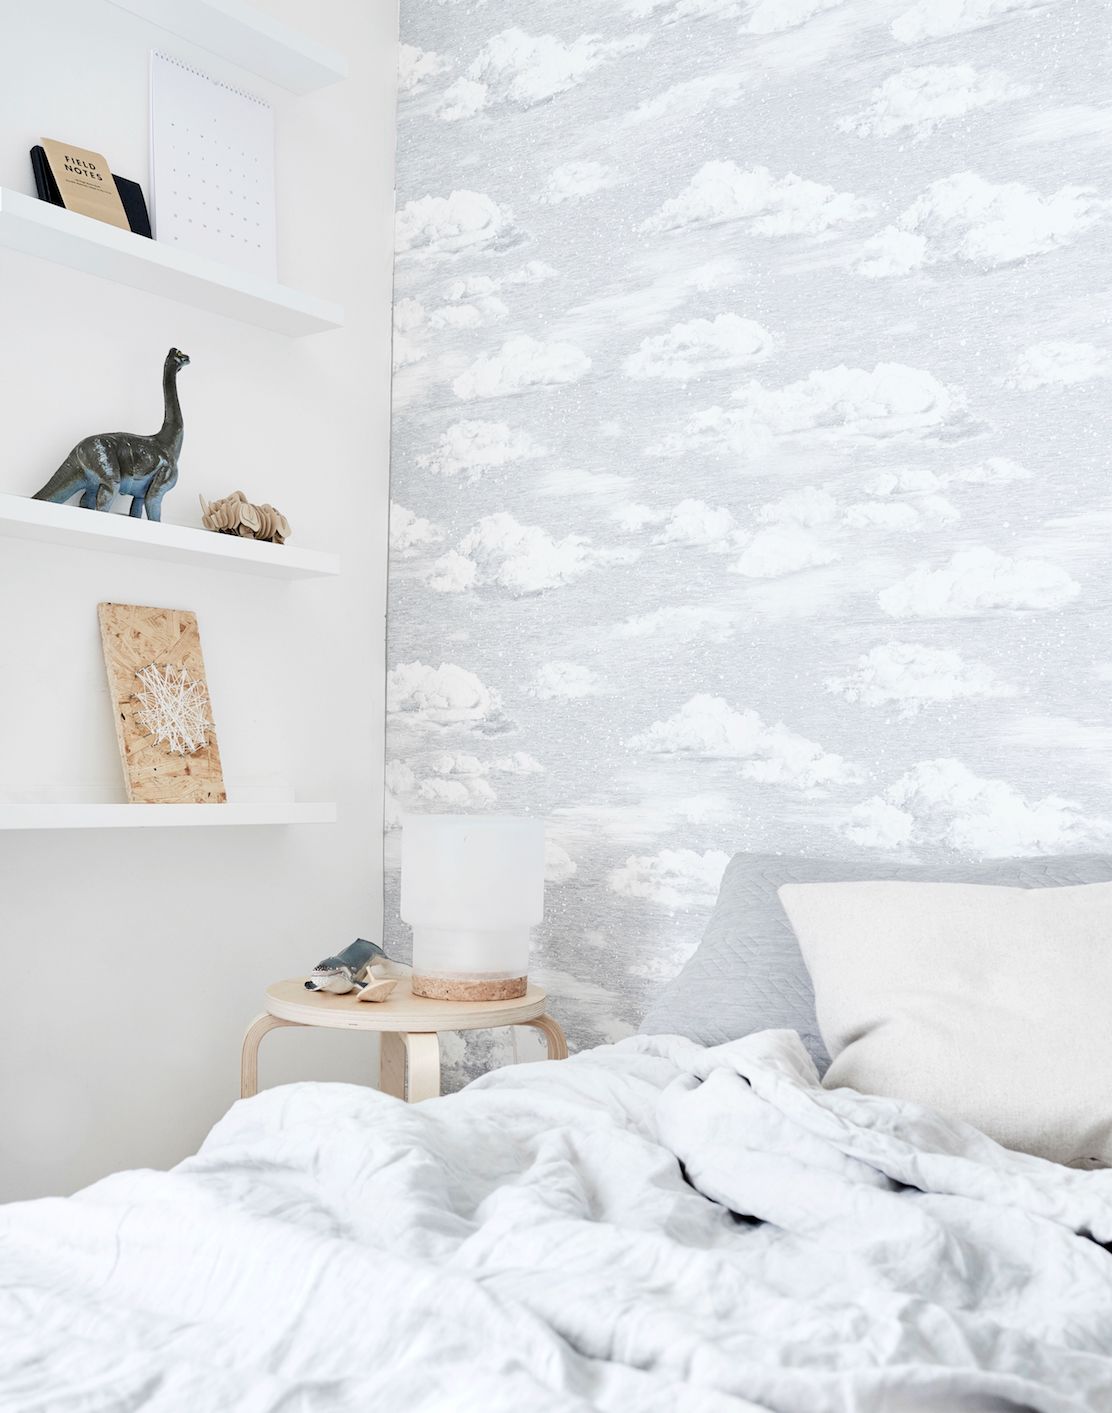 How to Transform Your Home With a Small Amount of Wallpaper